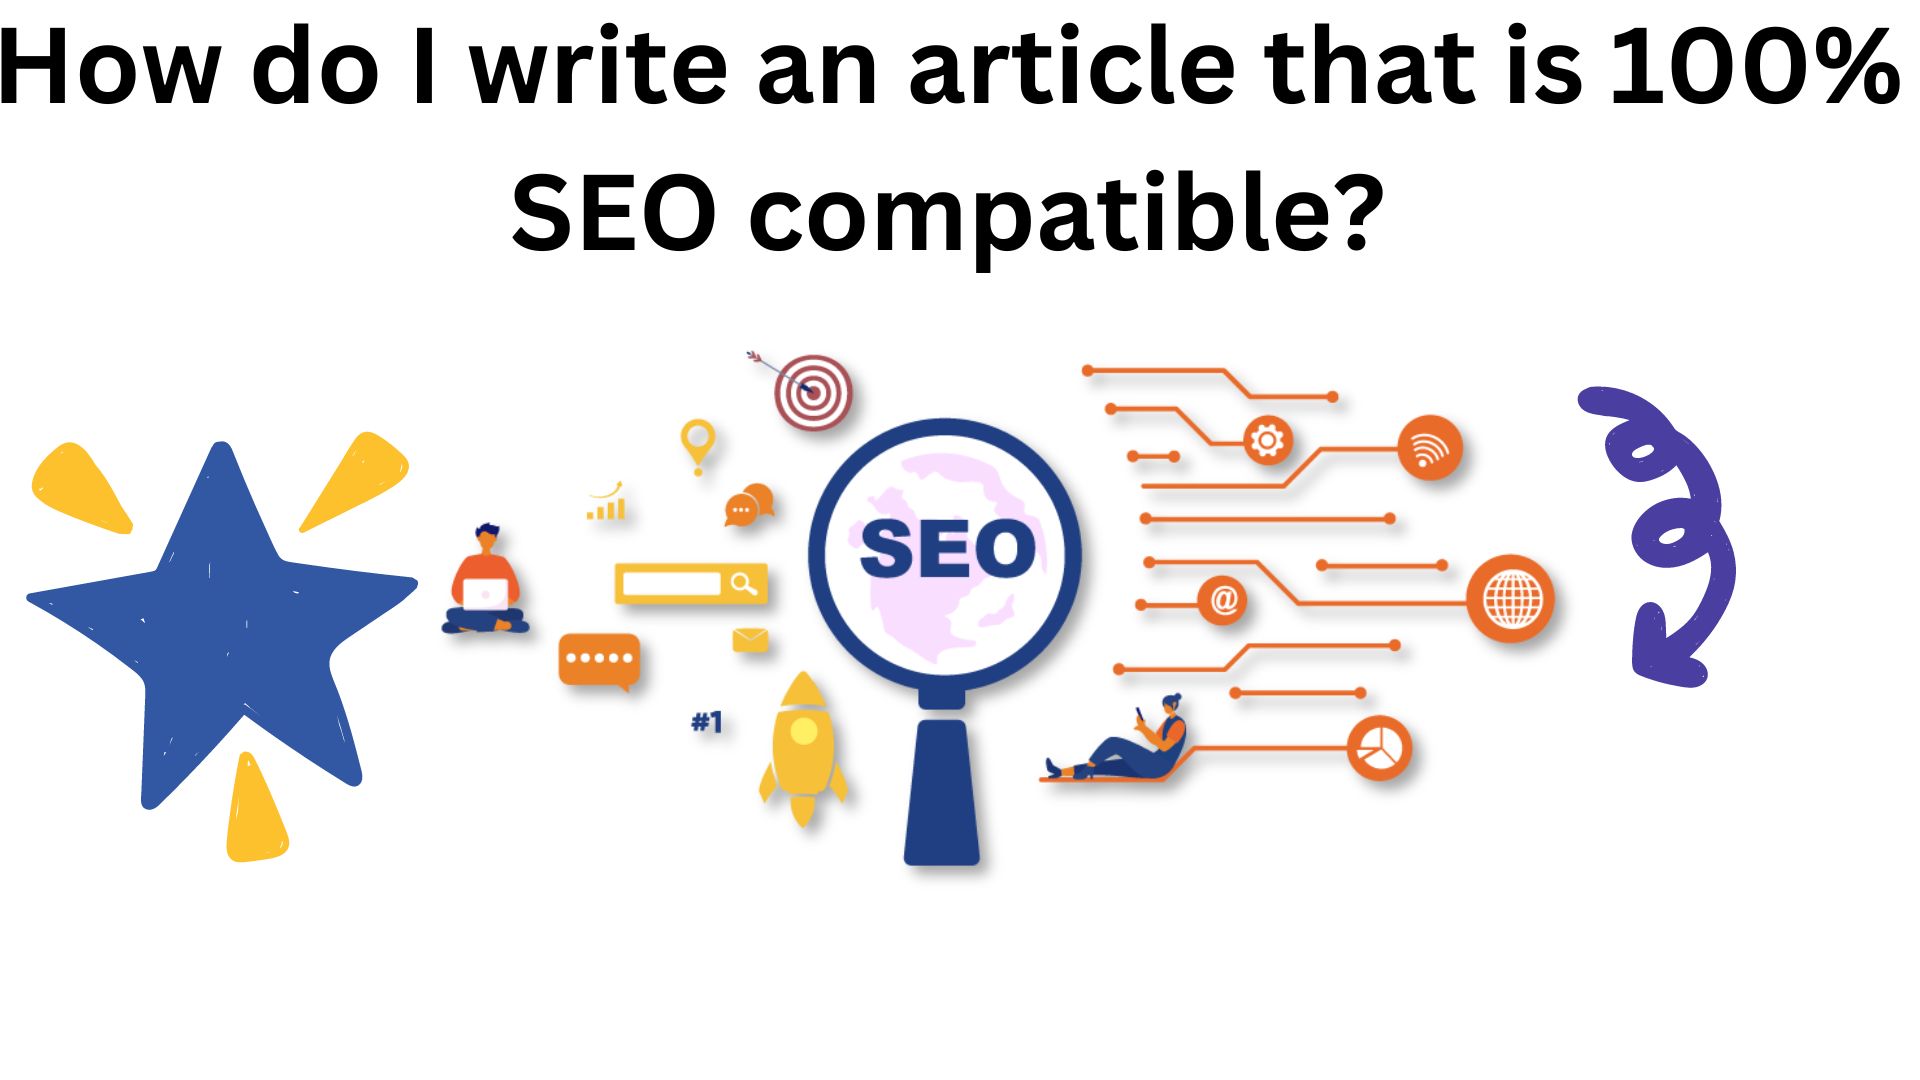 How Do I Write An Article That Is 100% Seo Compatible?